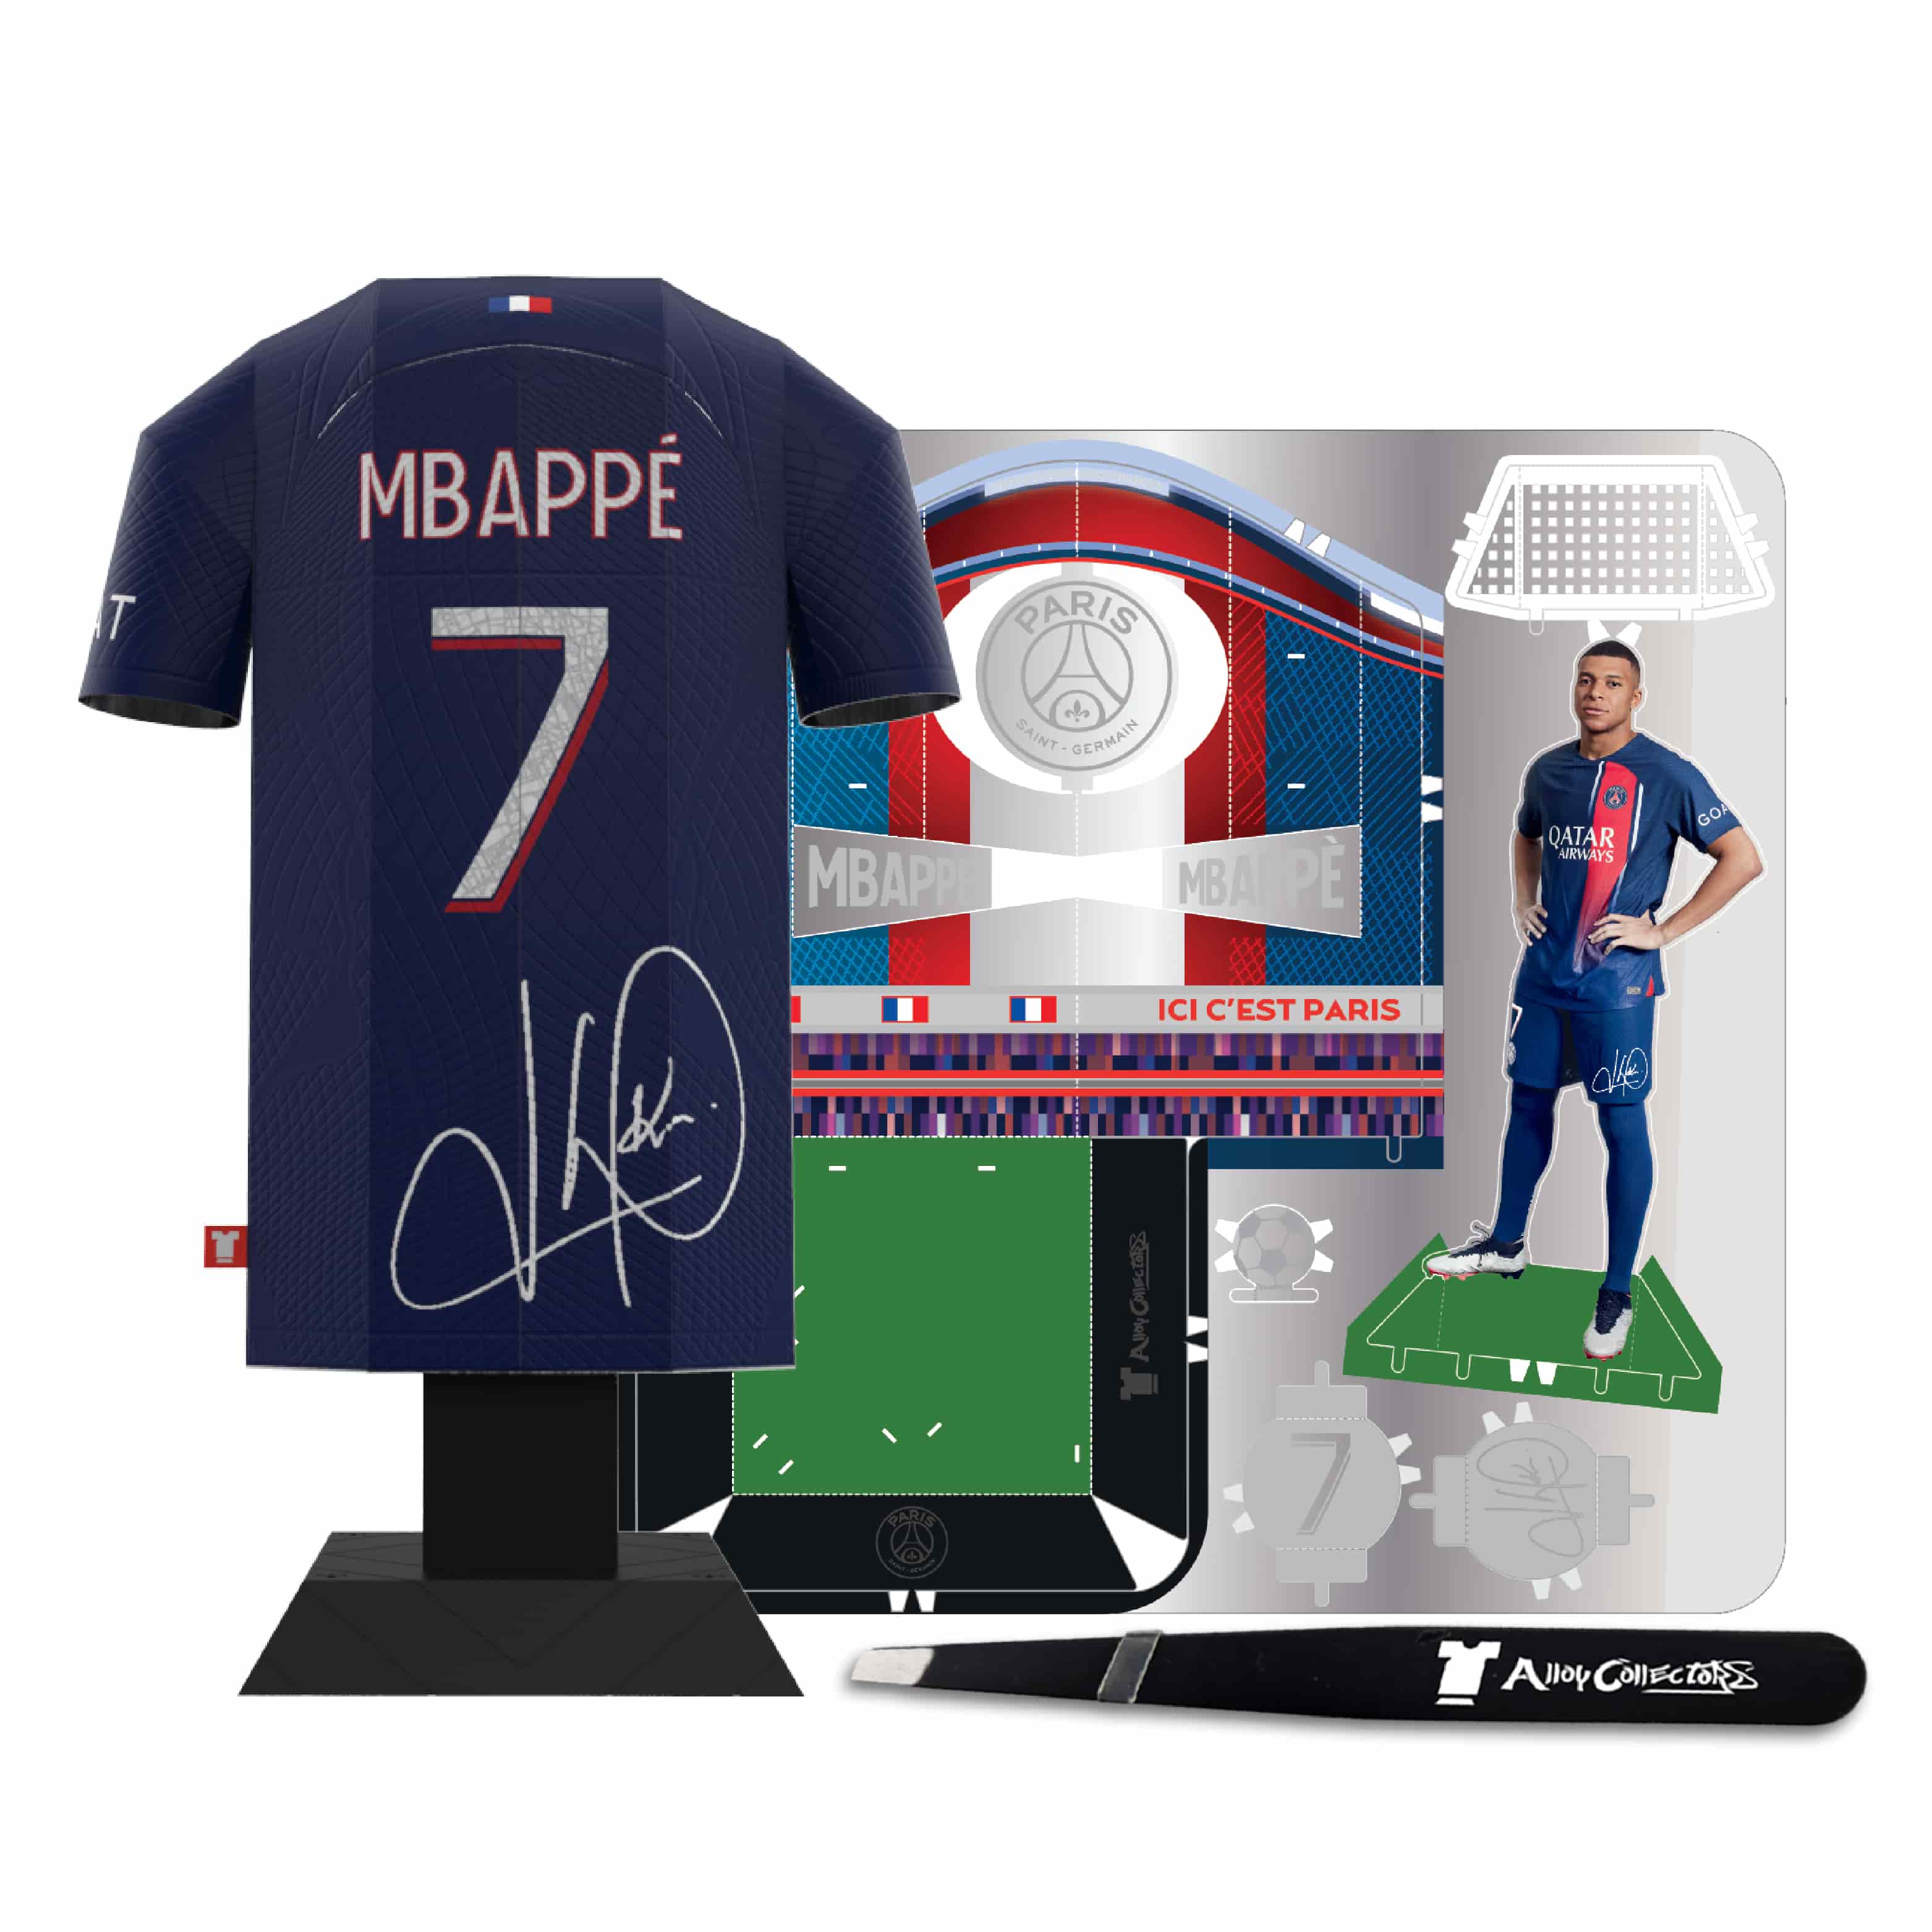 Mbappe content shot with metal flat lay